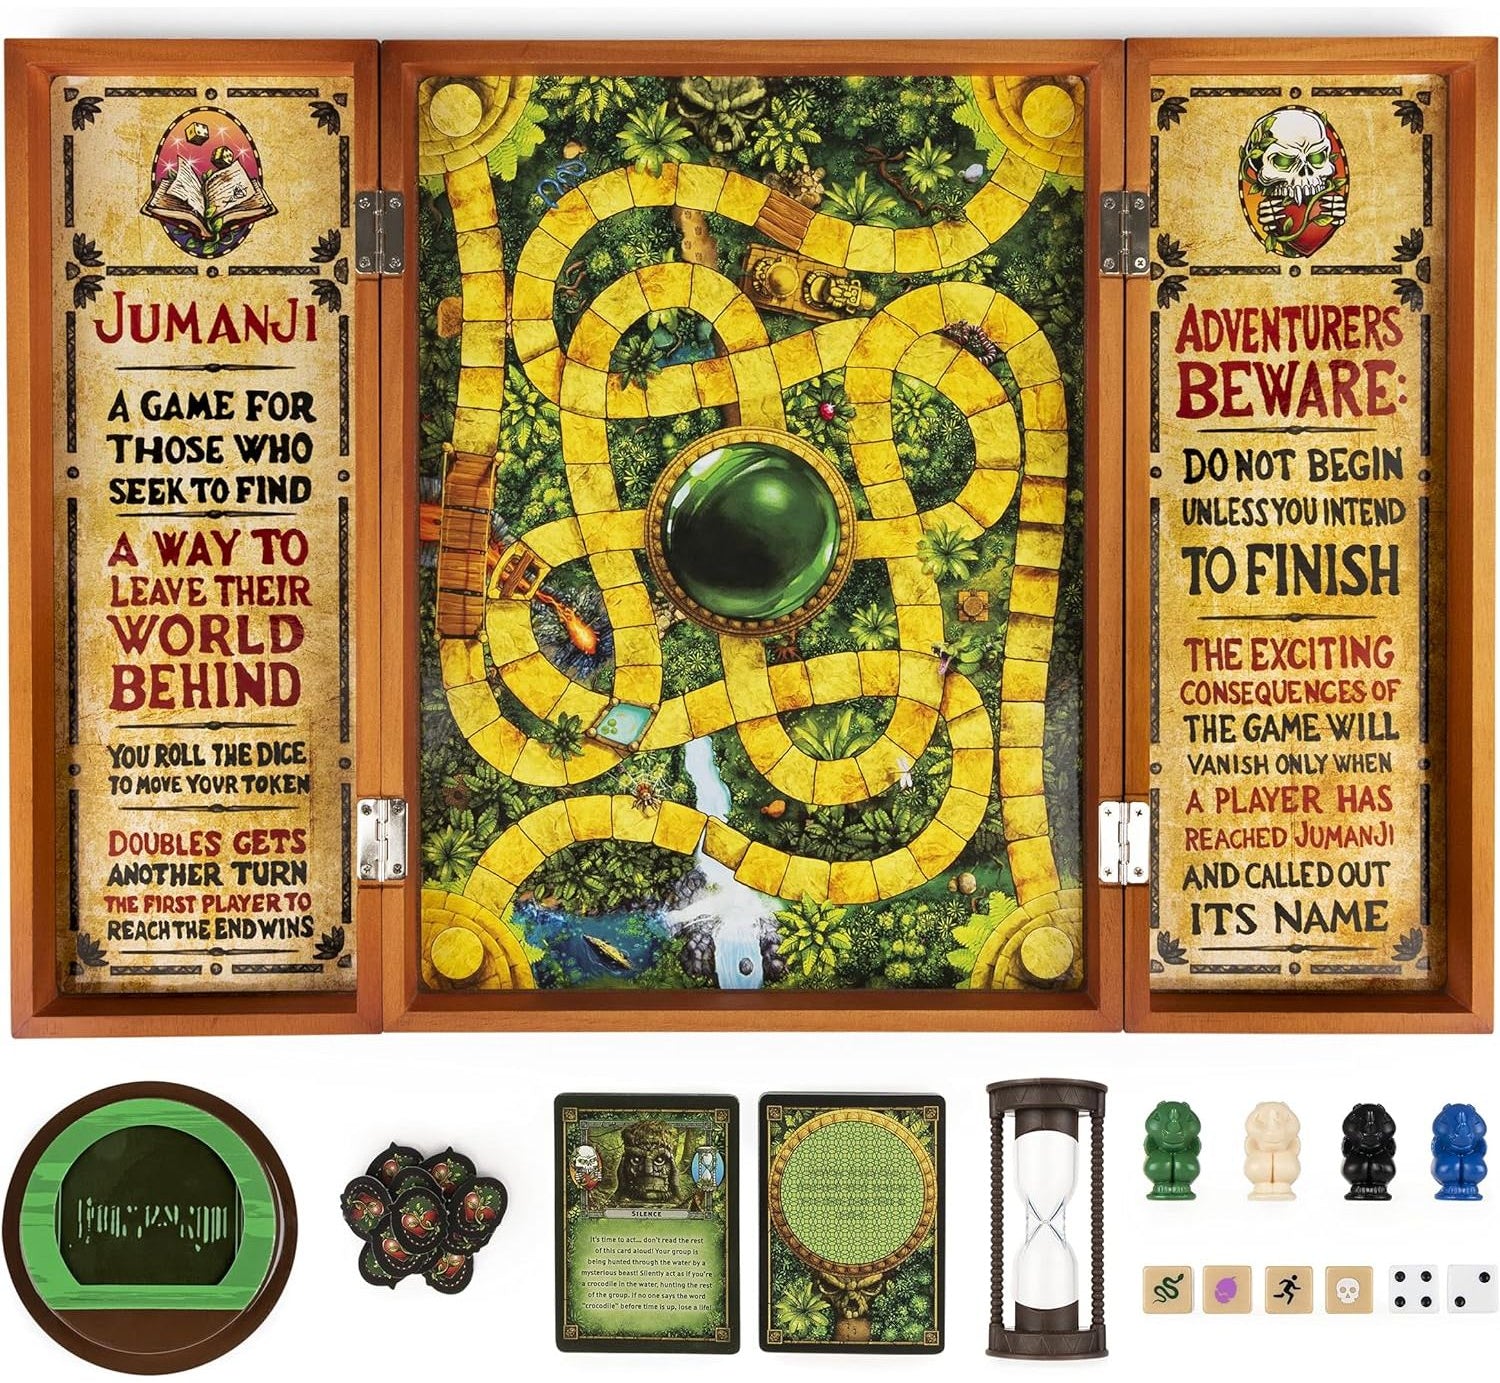 Spin Master Games Jumanji The Game Real Wooden Box Edition of The Classic Adventure Board Game